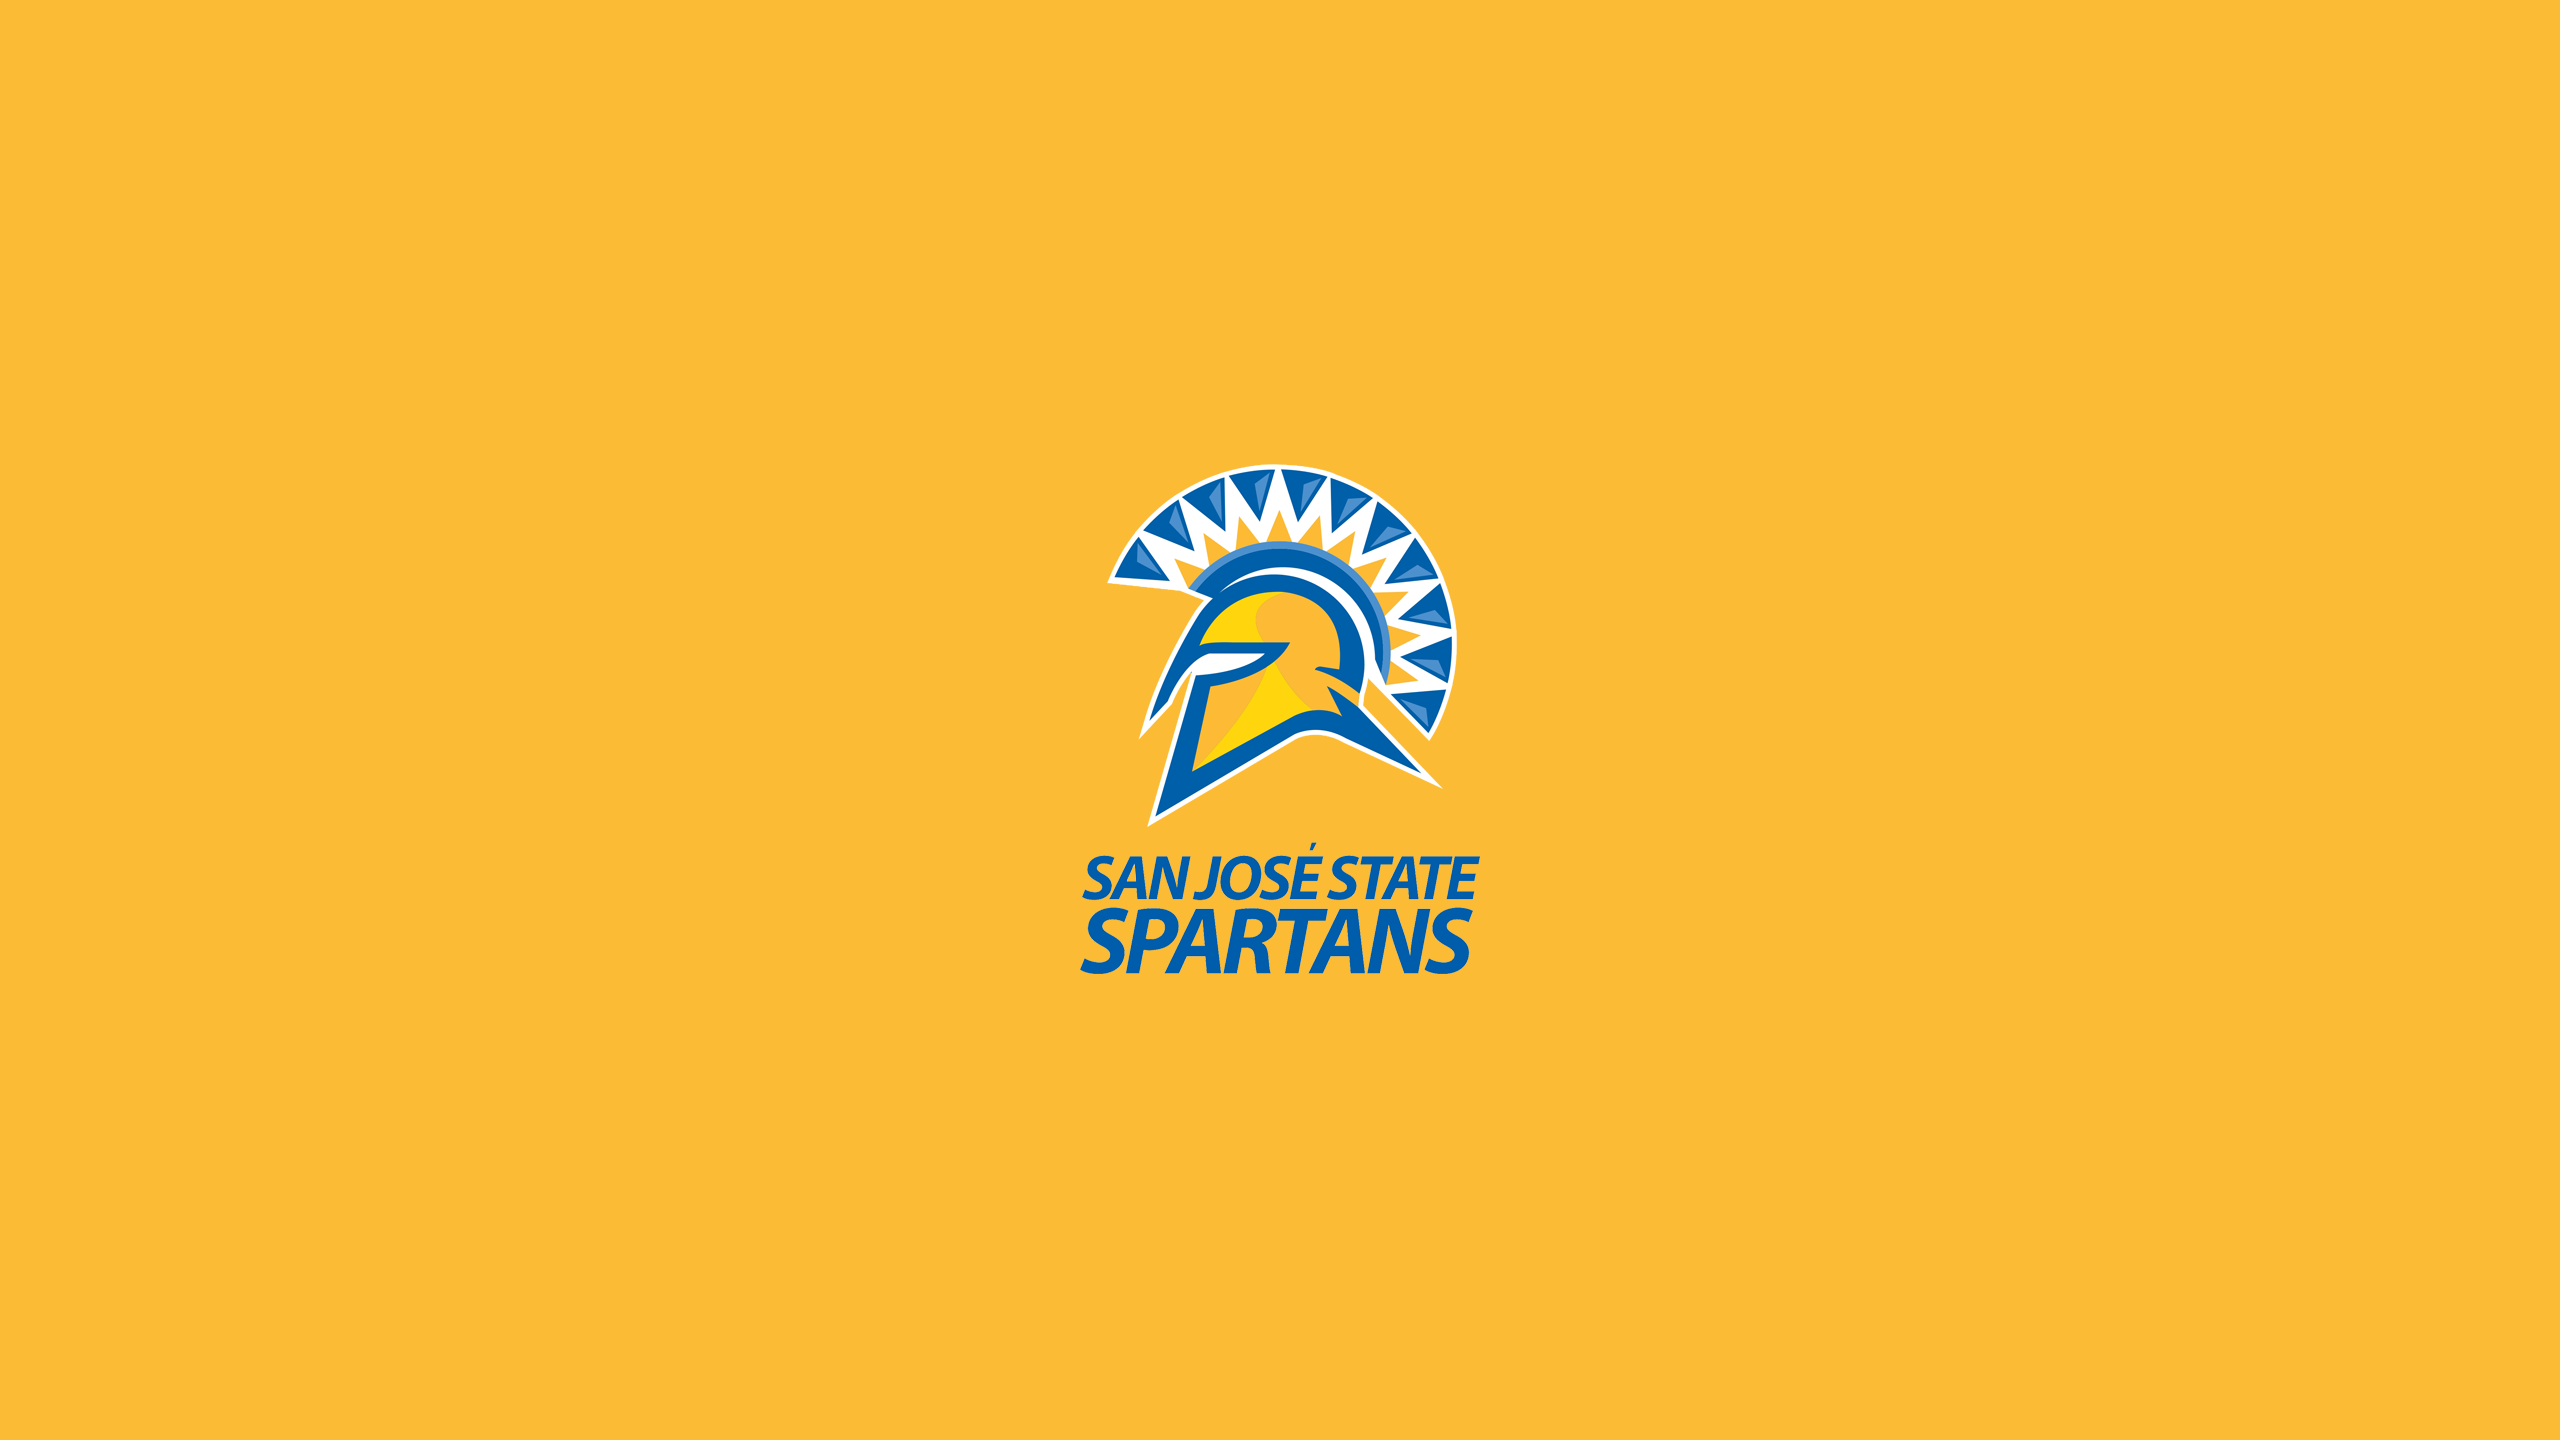 San Jose State Spartans Basketball - NCAAB - Square Bettor